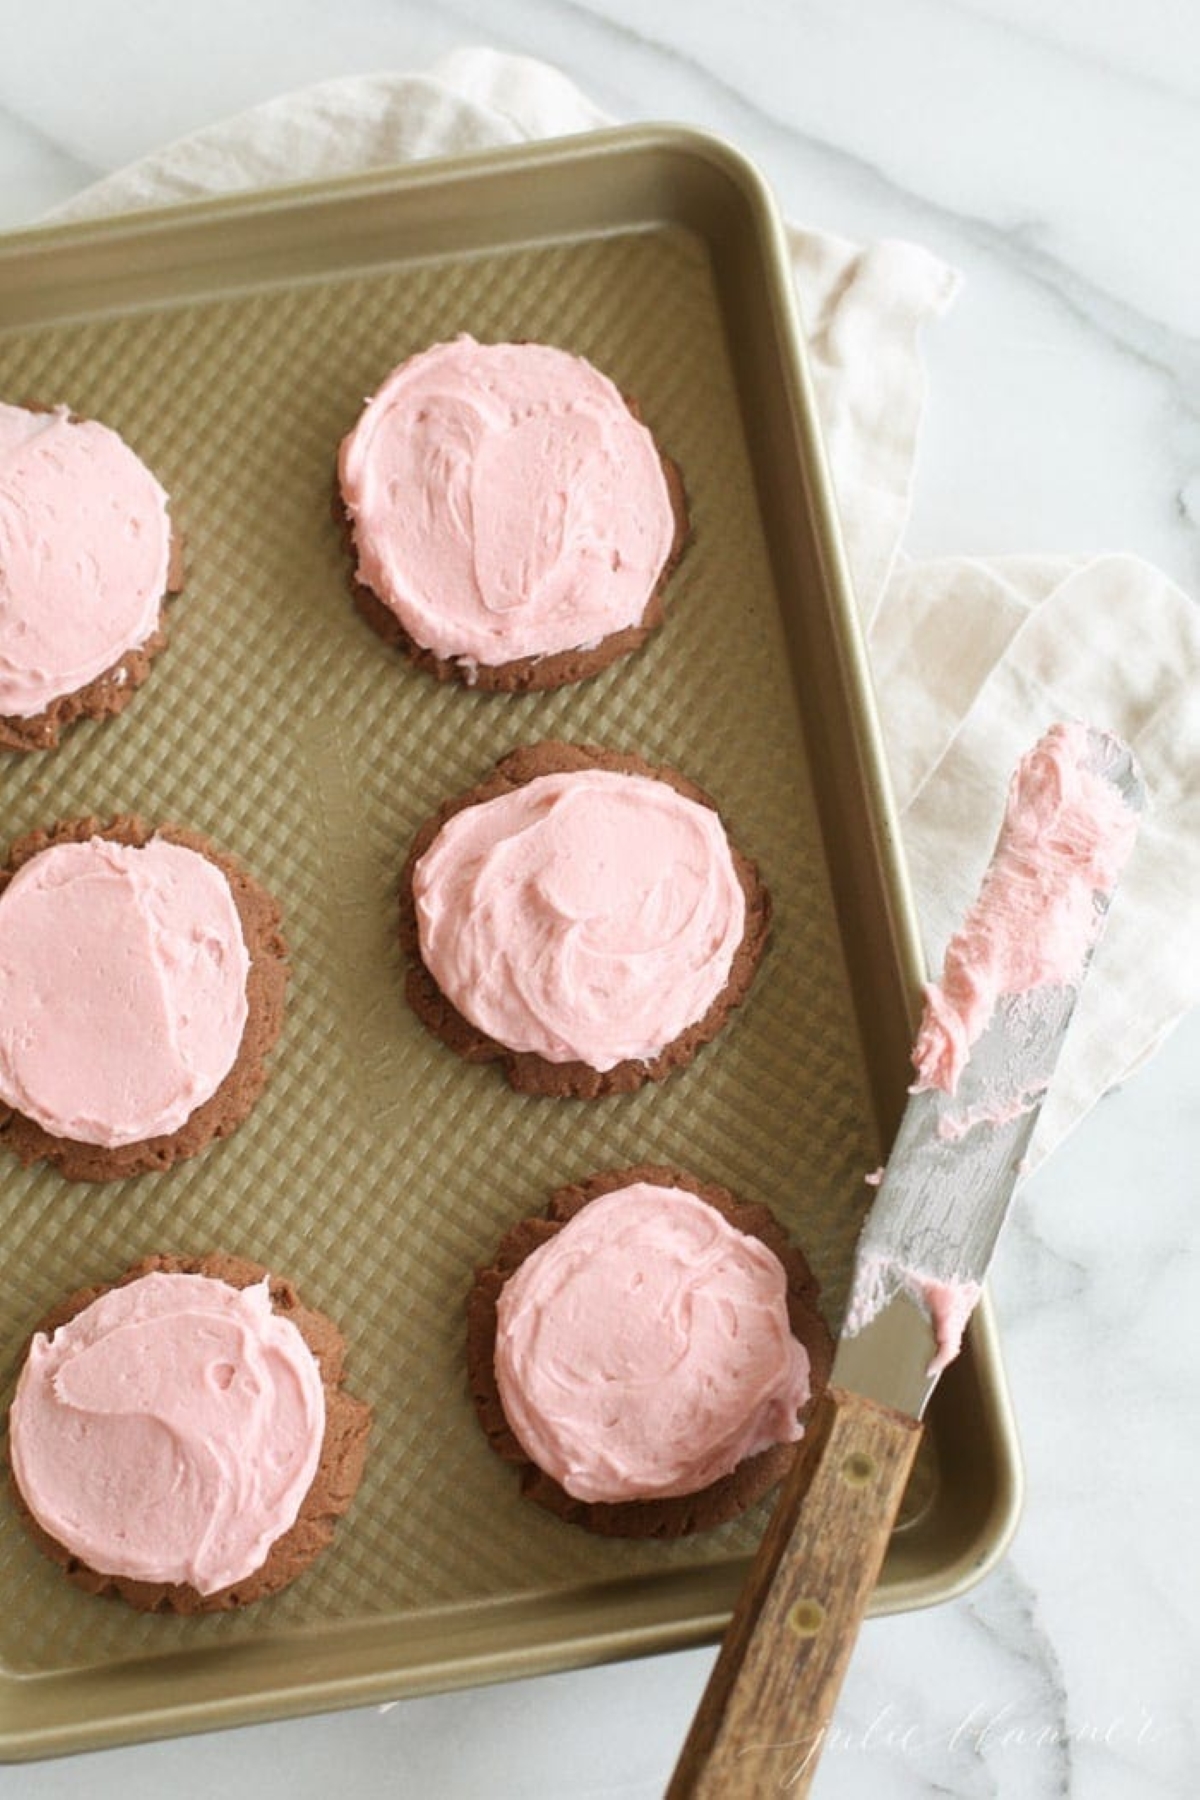 Chocolate sugar cookies iced with pink buttercream icing, on a gold cookie sheet.